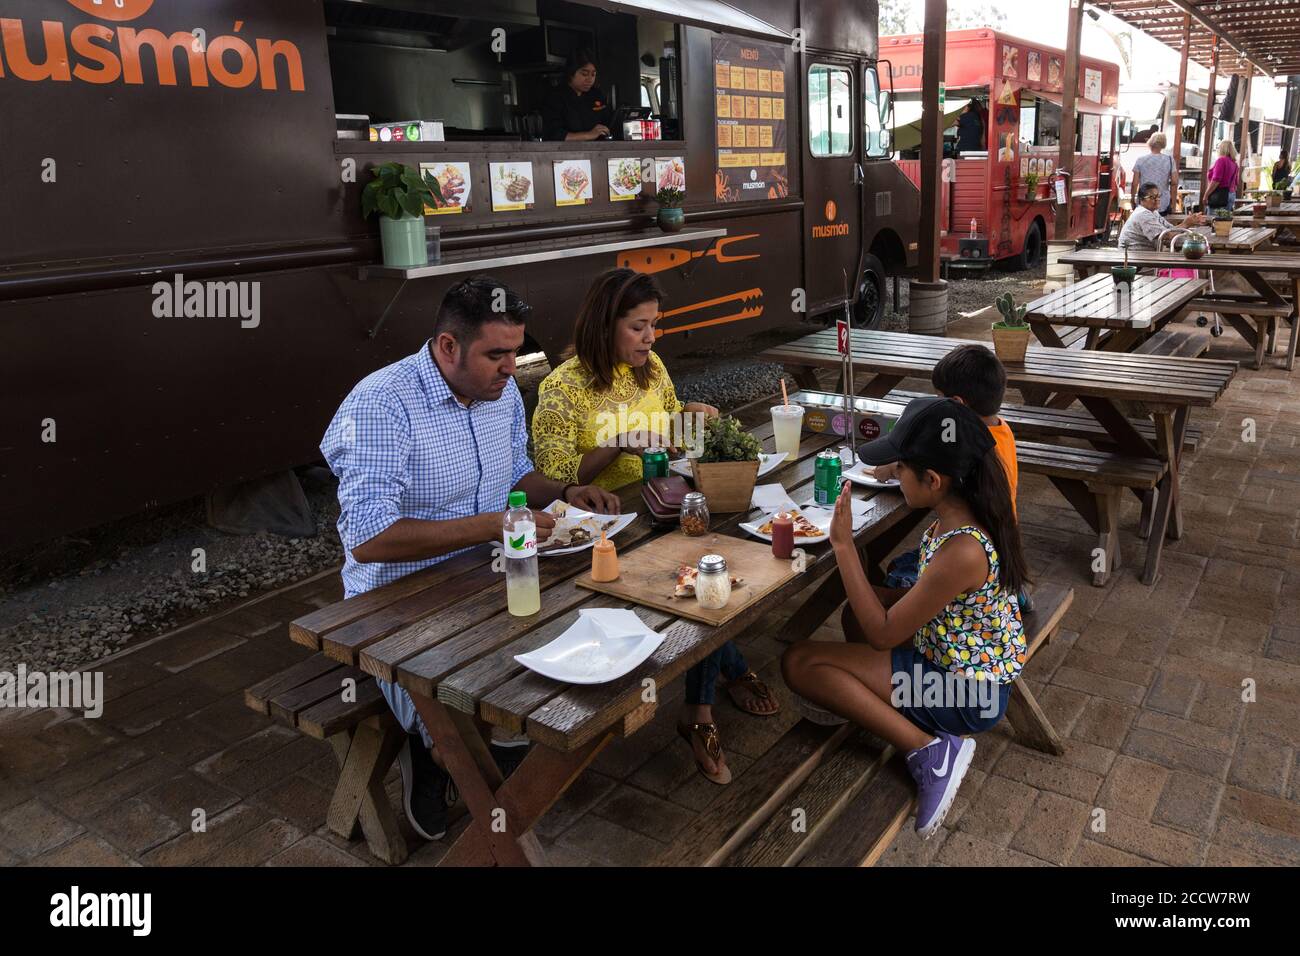 A familiy in an outdoor eating area with mobile food vender's trucks in Tijuana, Mexico. Stock Photo